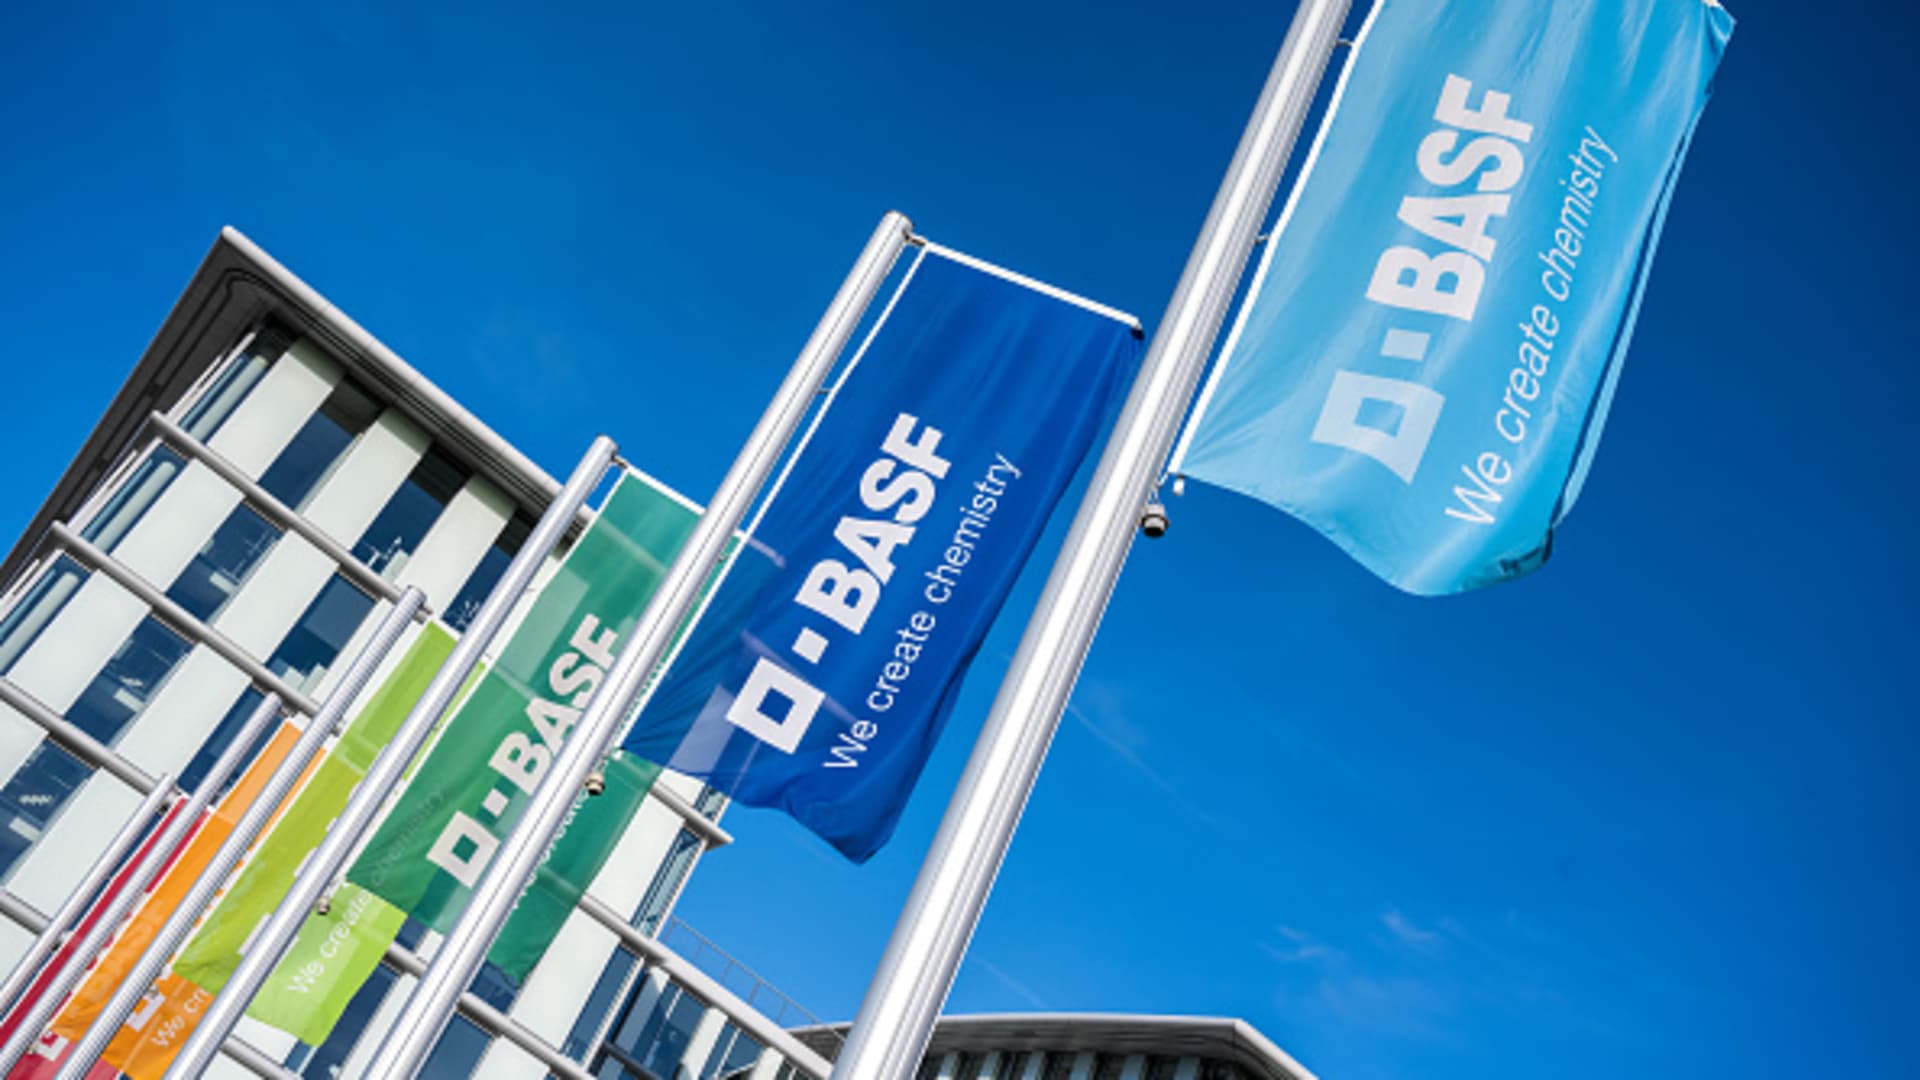 BASF to cut 2,600 jobs on high costs in Europe